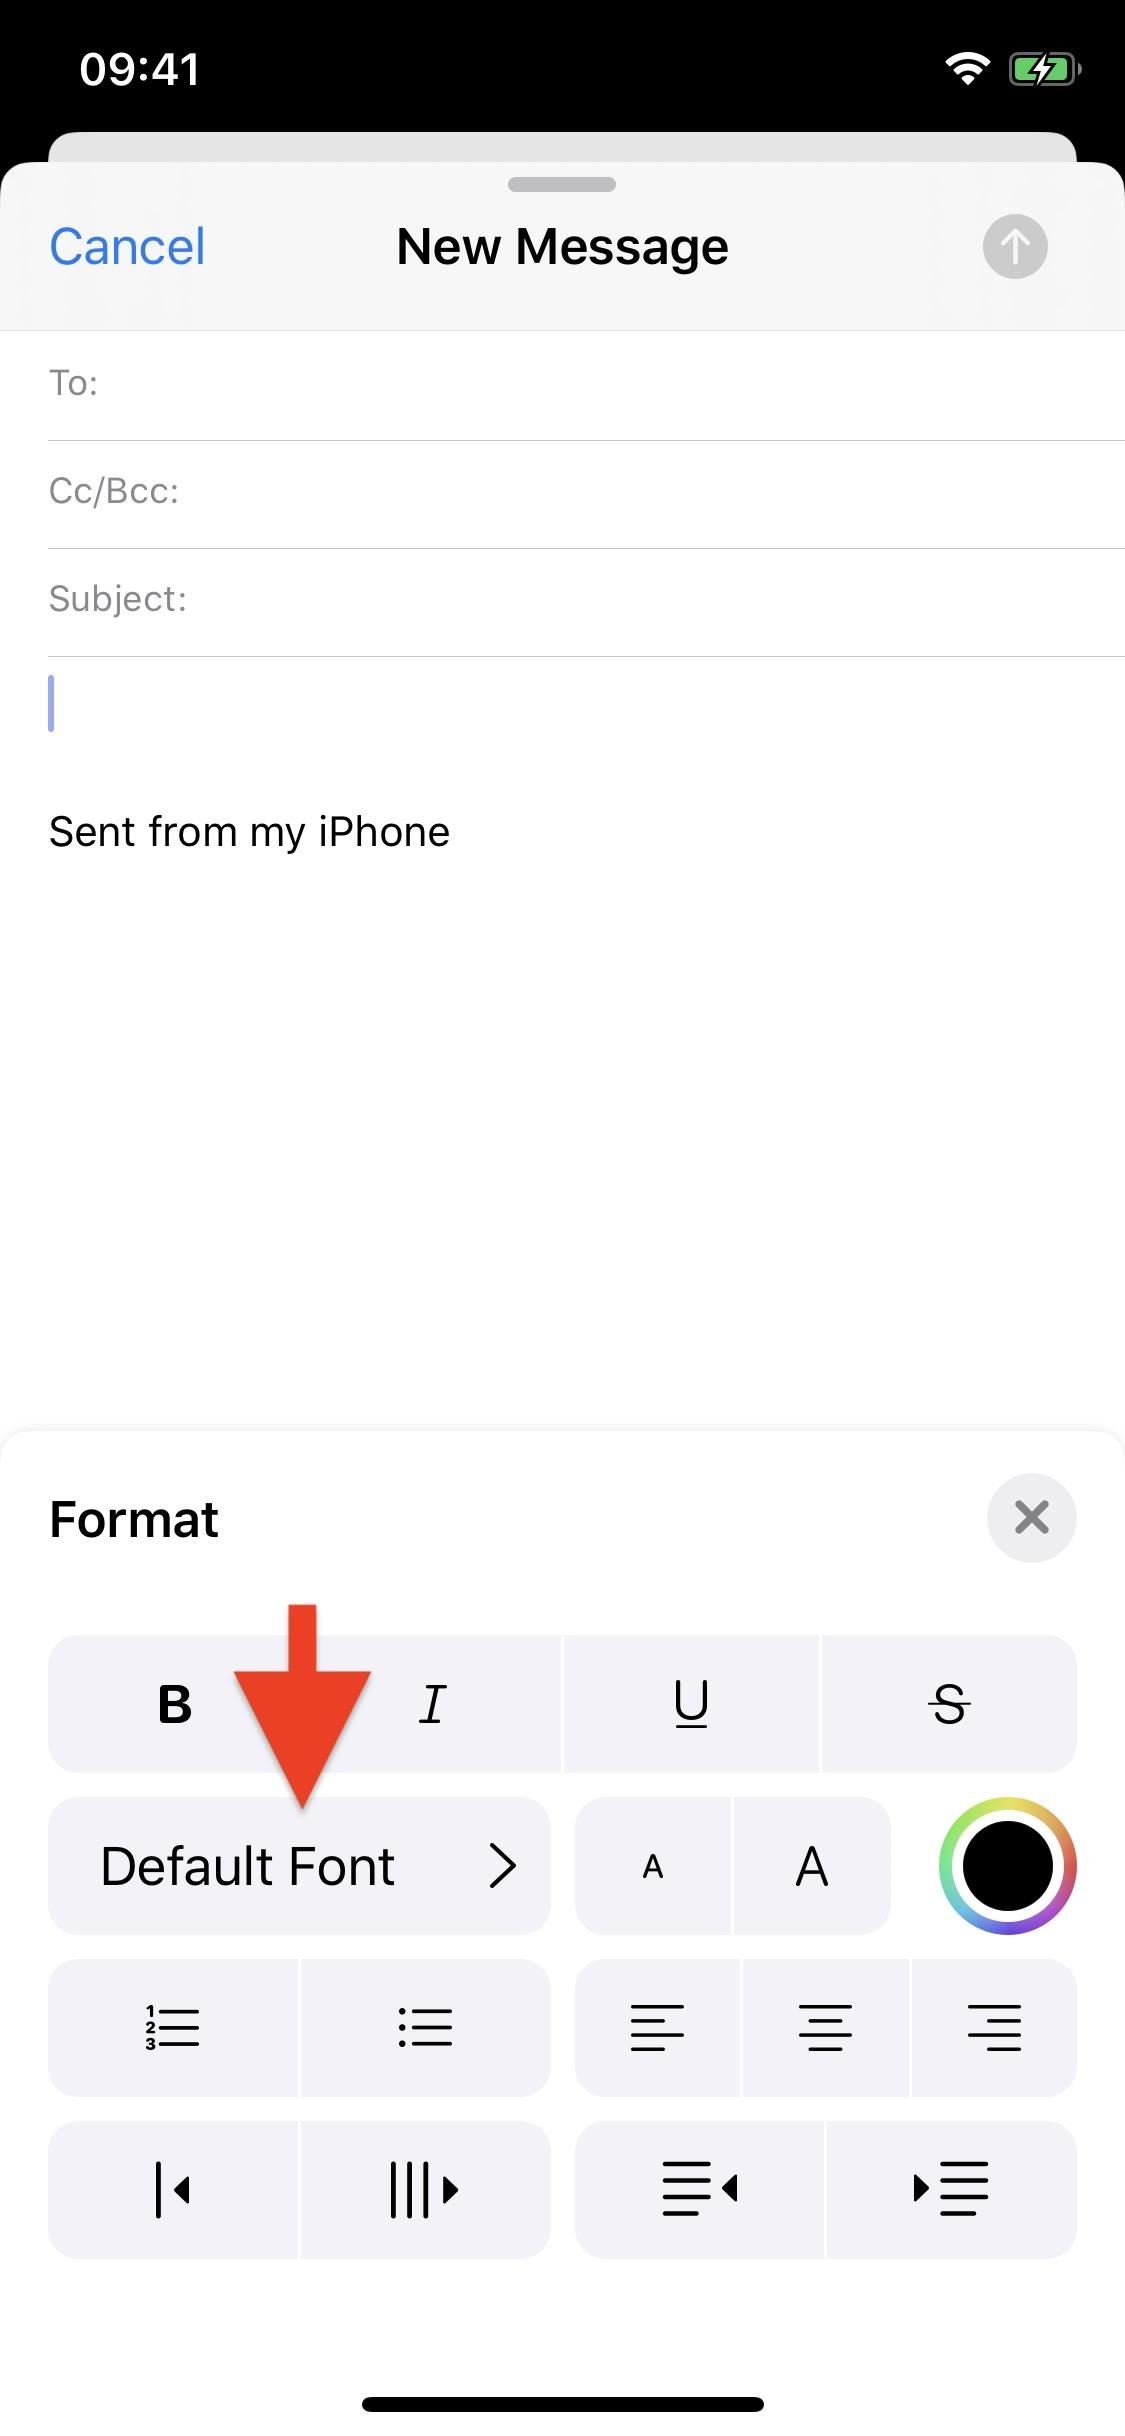 How to Download & Install Custom Fonts on Your iPhone in iOS 13